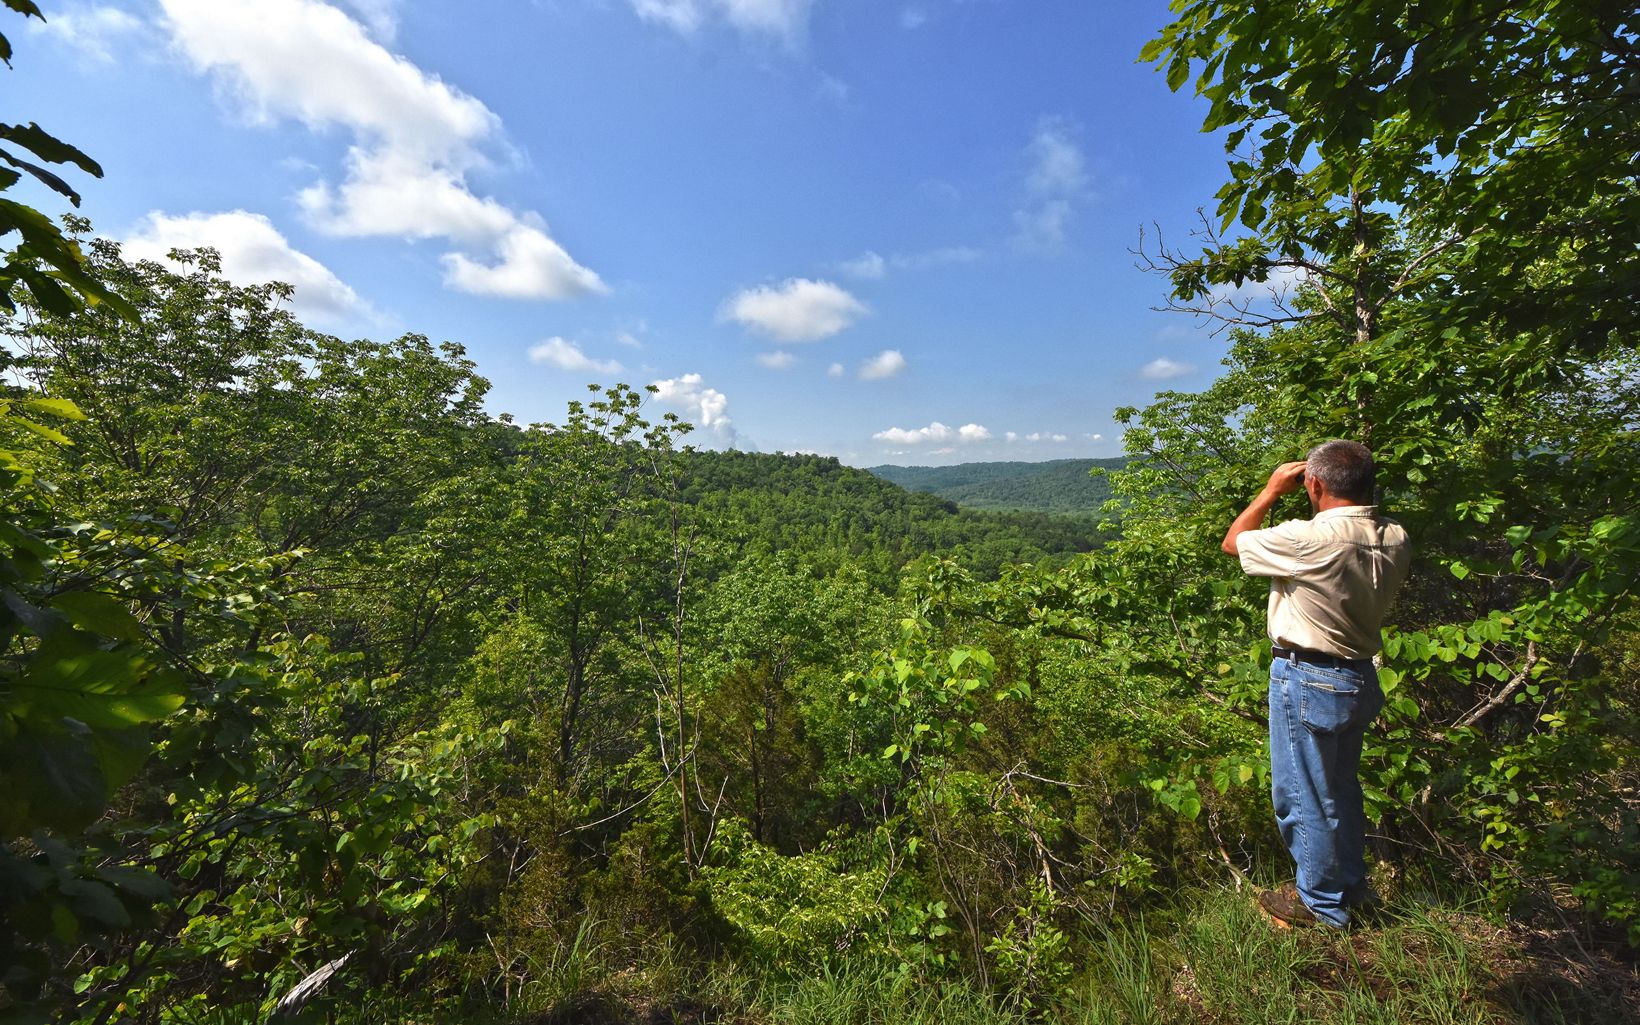 Joan Jones Portman Trail The 1.6-mile, round-trip Joan Jones Portman Trail at the Edge of Appalachia Preserve System extends through prairie and up into a forested landscape to reveal this overlook. © Randall Schieber